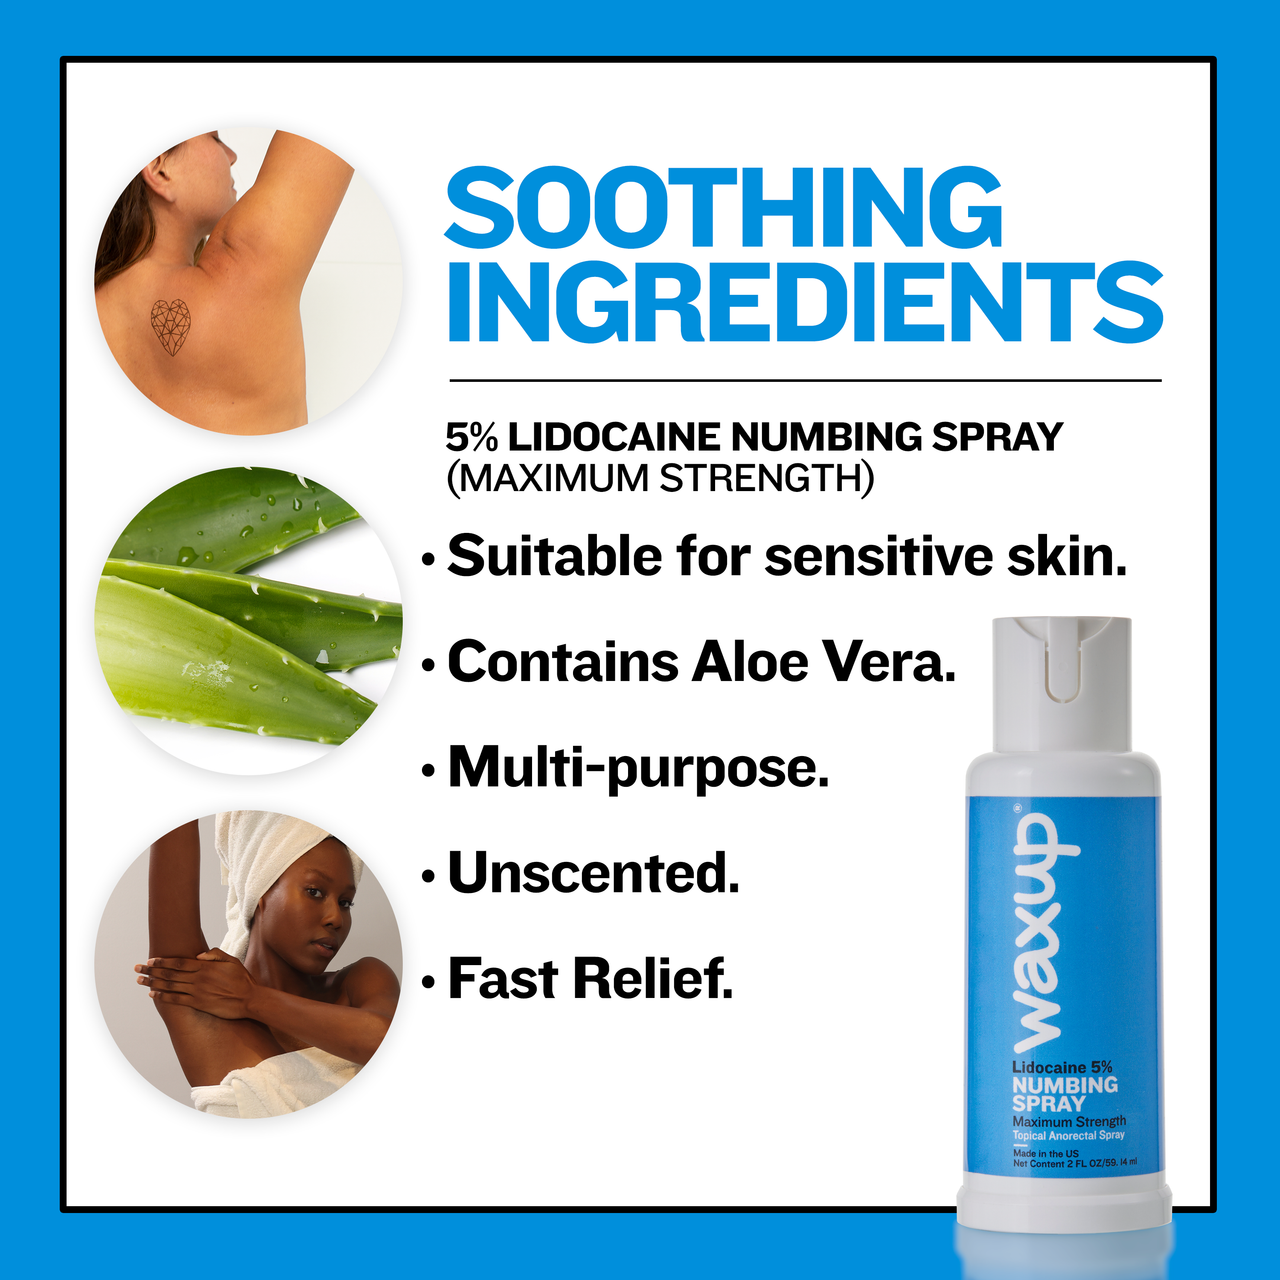 Numbing Spray 5% Lidocaine 2 Pack - thatswaxup -  - Pre Waxing Skin Care - waxup hair removal wax body waxing kit women and men professional waxing supplies